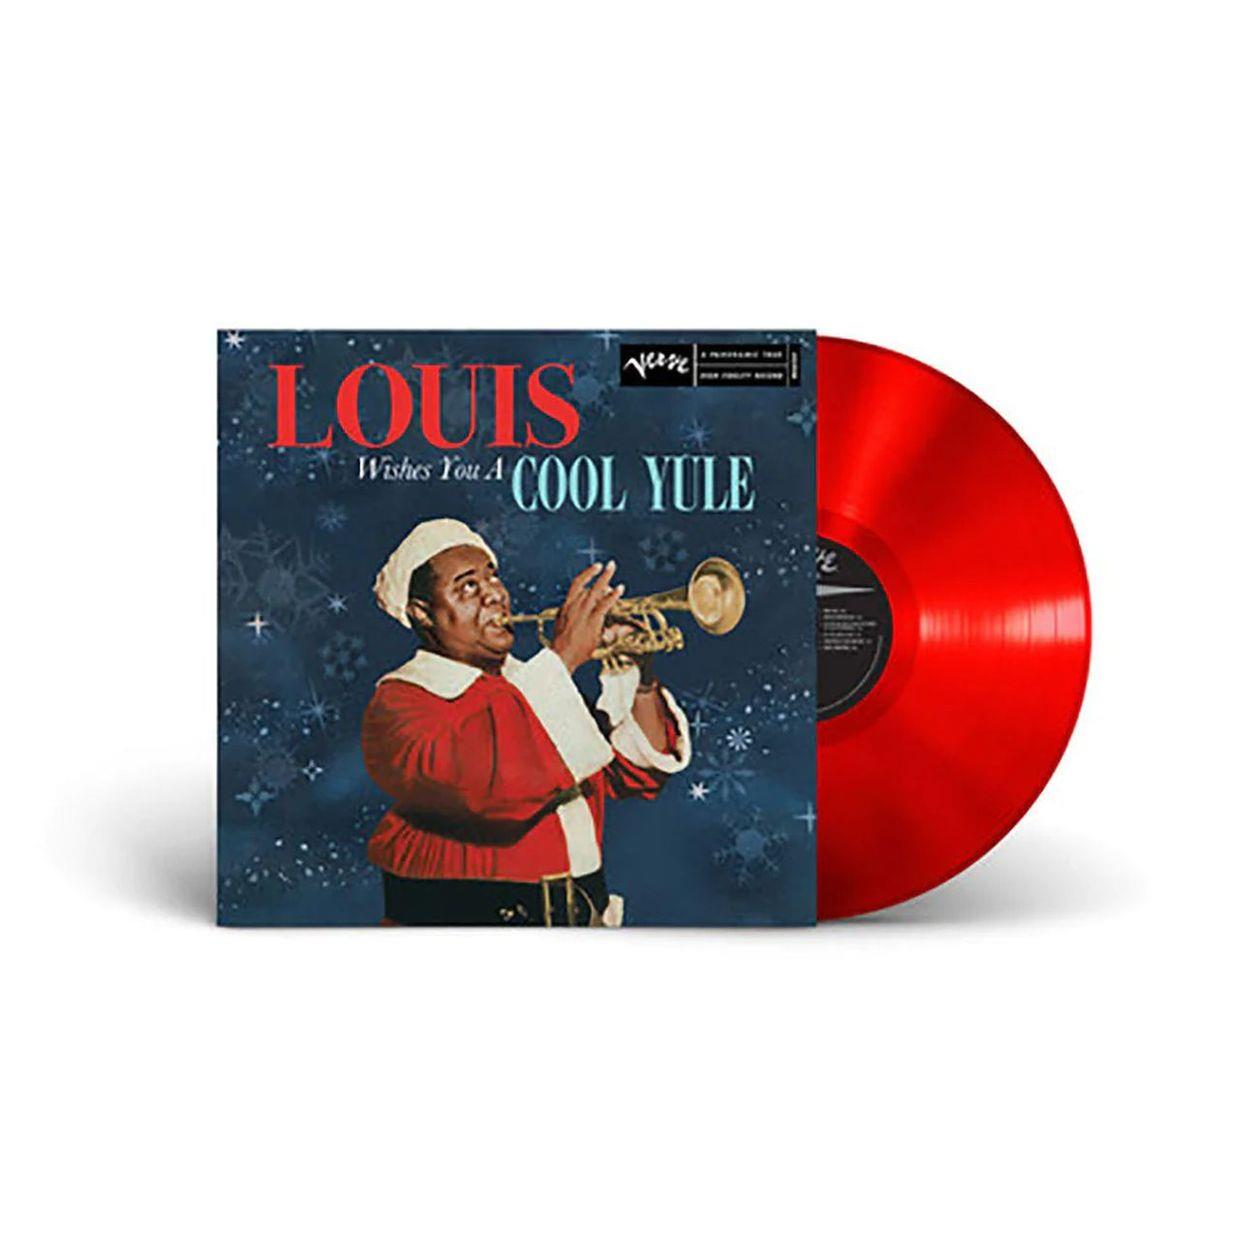 louie wishes you a cool yule (red vinyl)